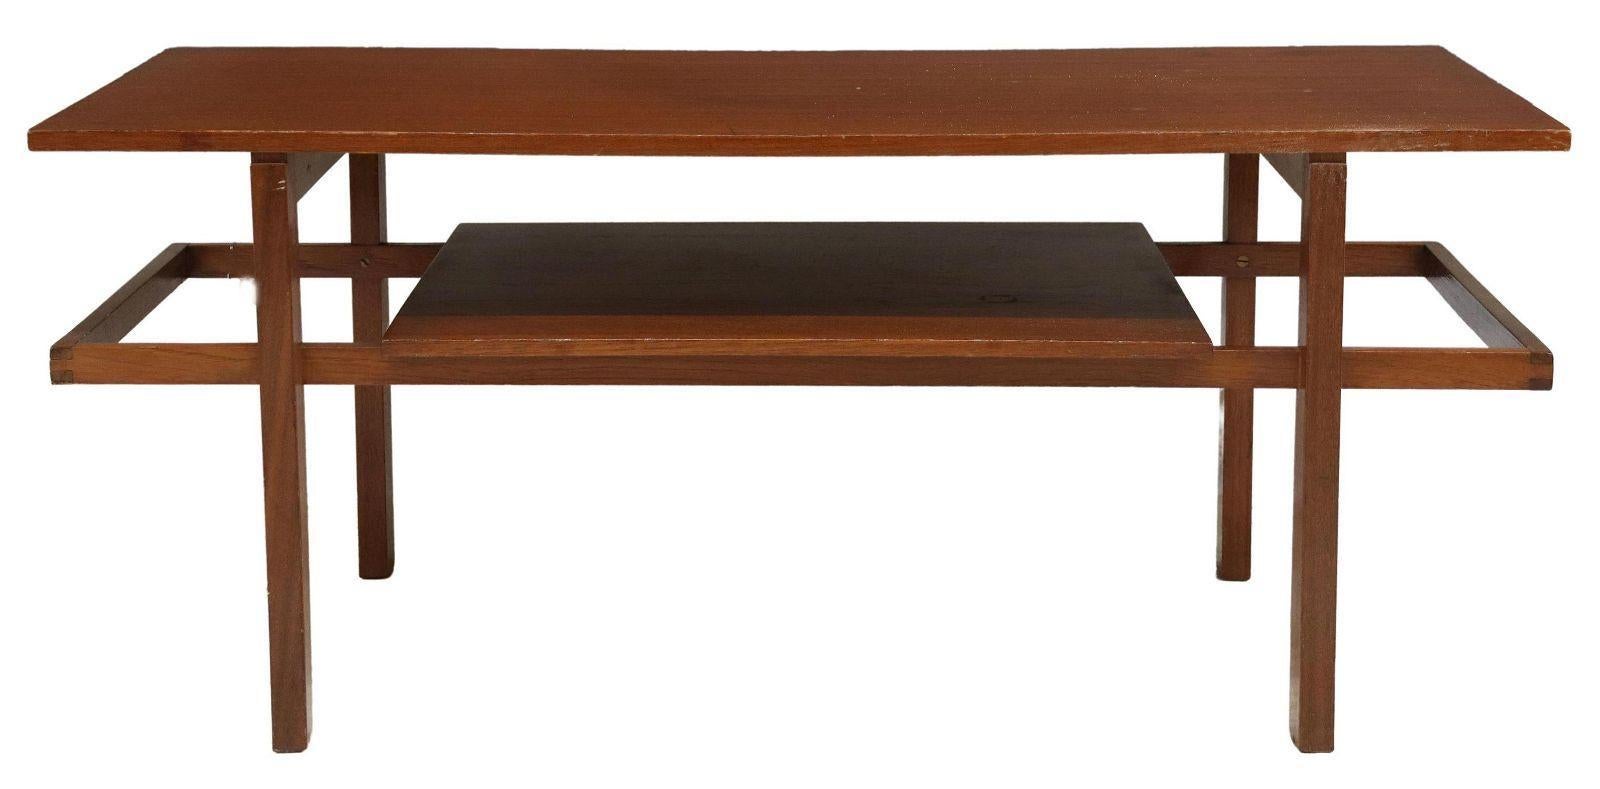 Italian mid-century modern teak coffee table, c.1960s. This table features a rectangular top, over medial tier, rising on stretcher-joined legs.

Dimensions
approx 18.75